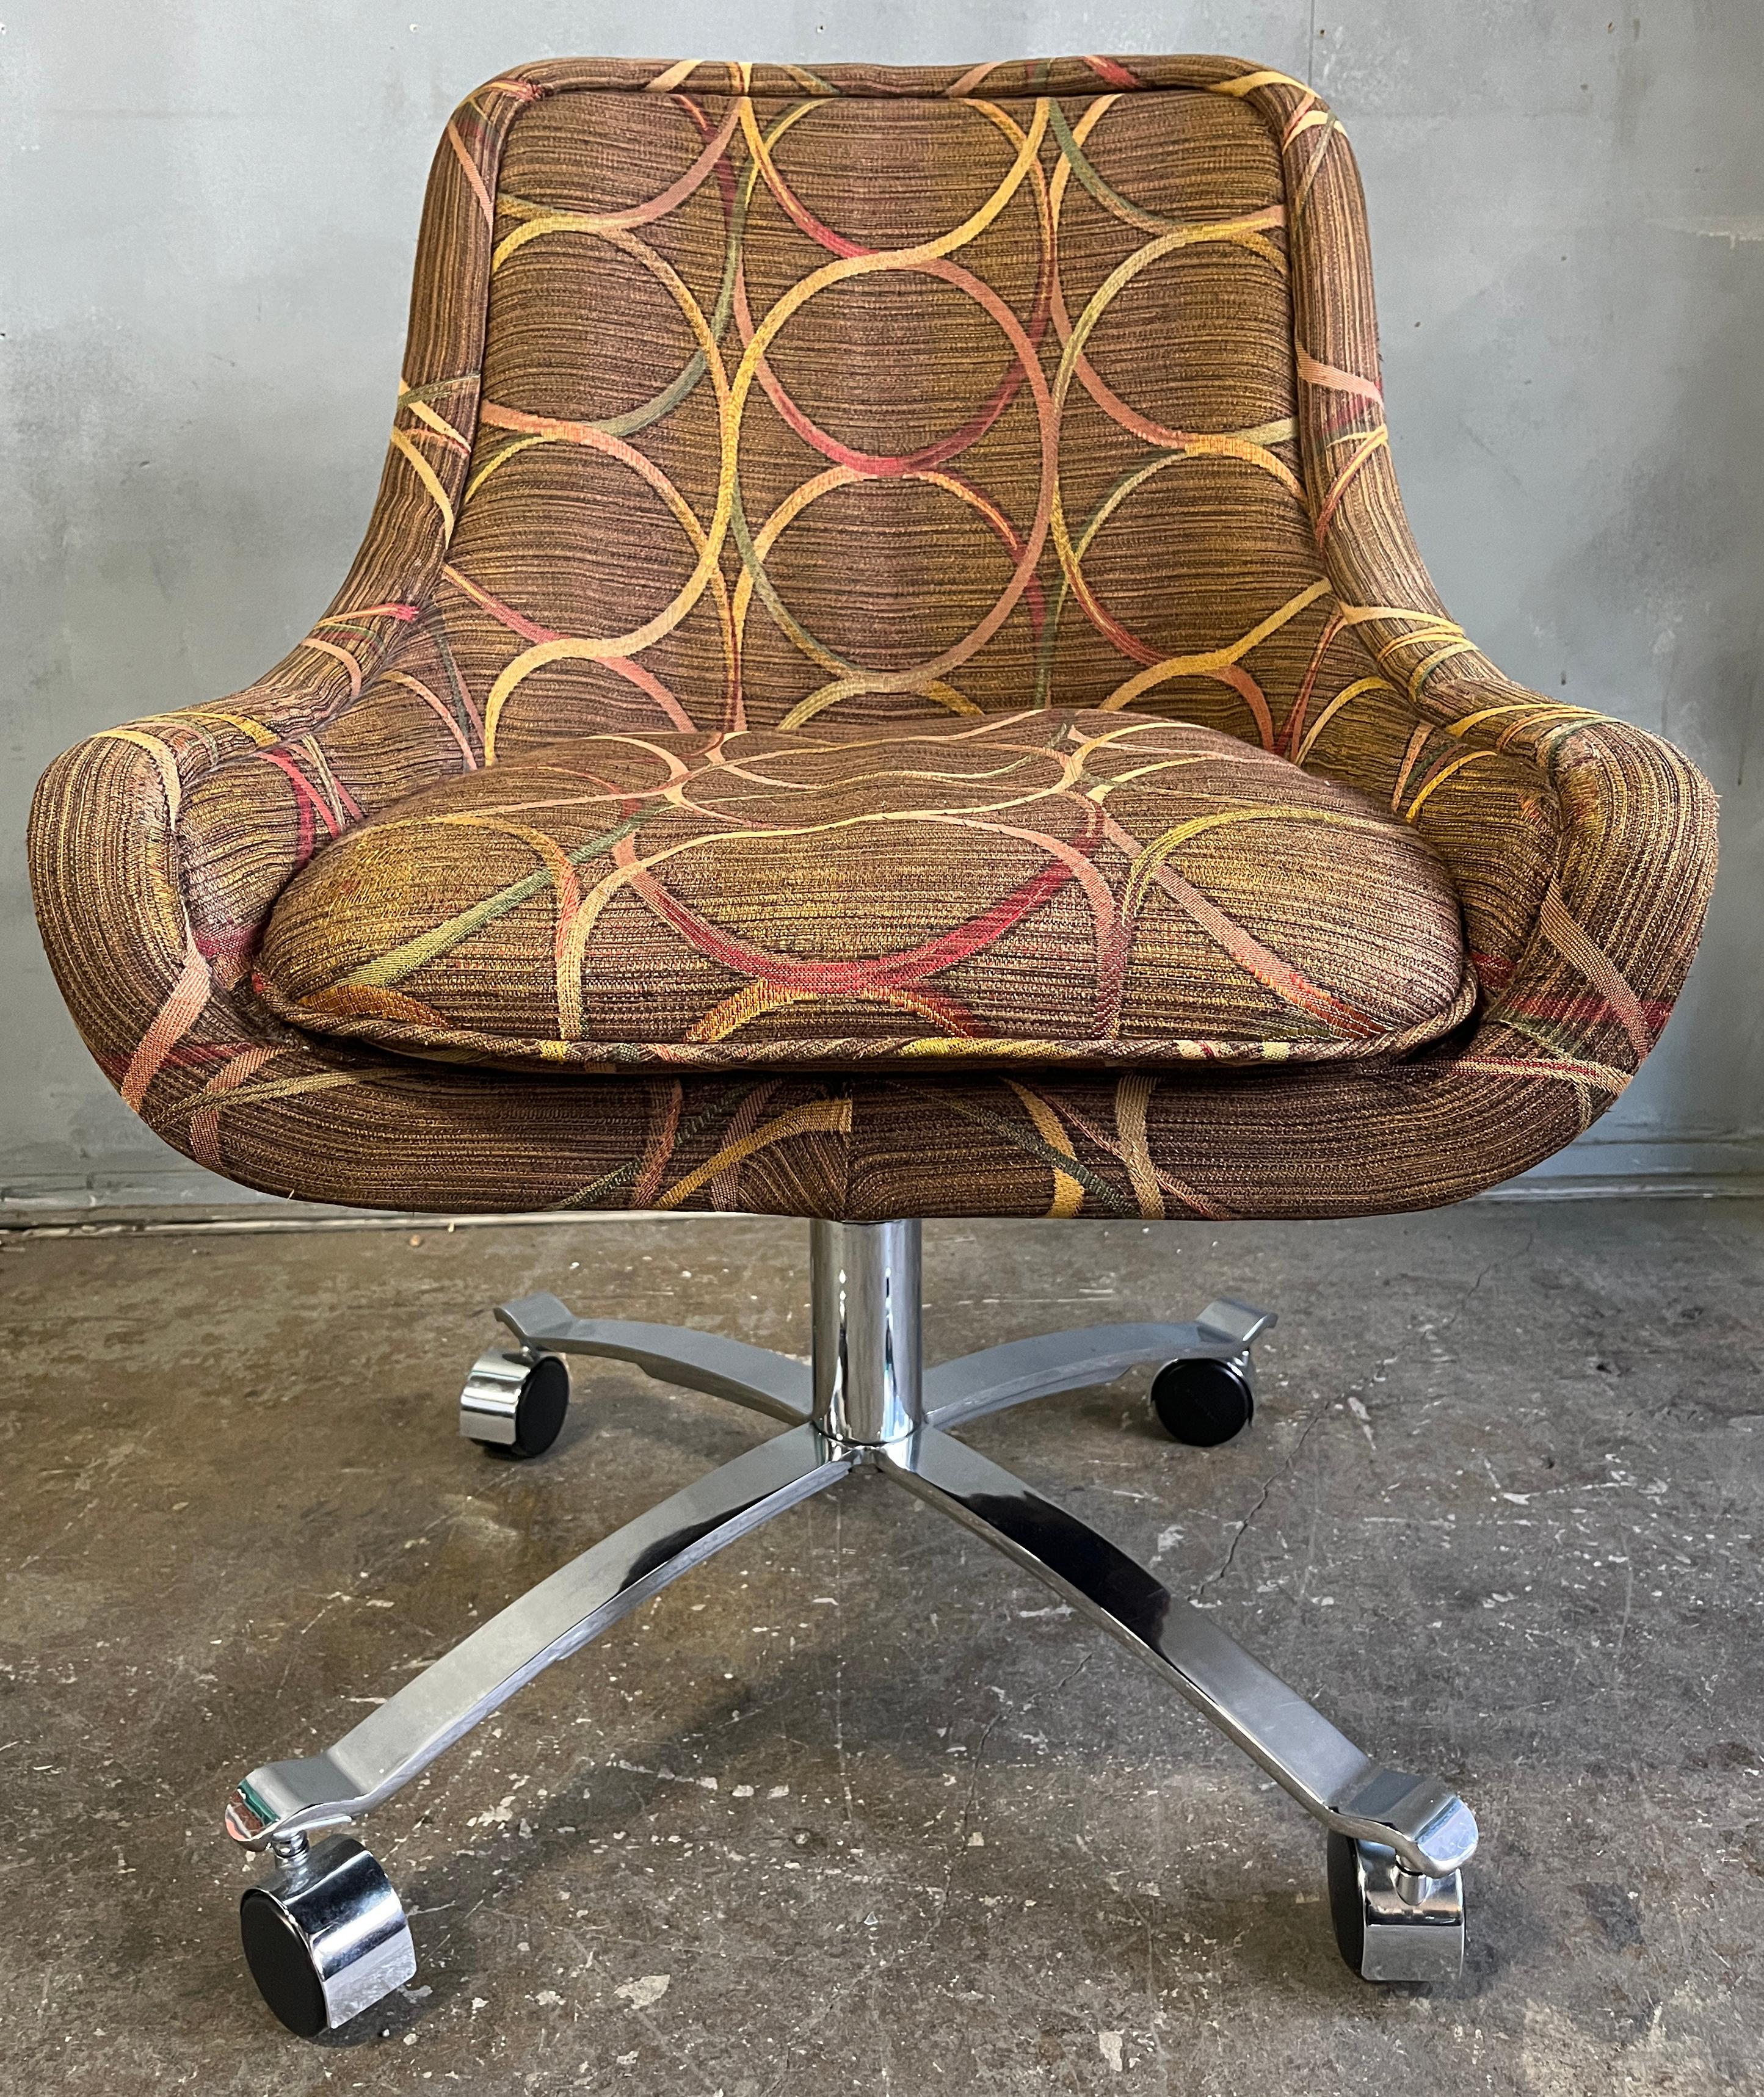 Rare form office chairs with period fabric in clean almost unused shape. Created by Japanese designer Naoto Fukasawa, Saiba Chair for Herman Miller. Height and tilt adjustable. Rare opportunity to own a period piece in great shape.

Seat height